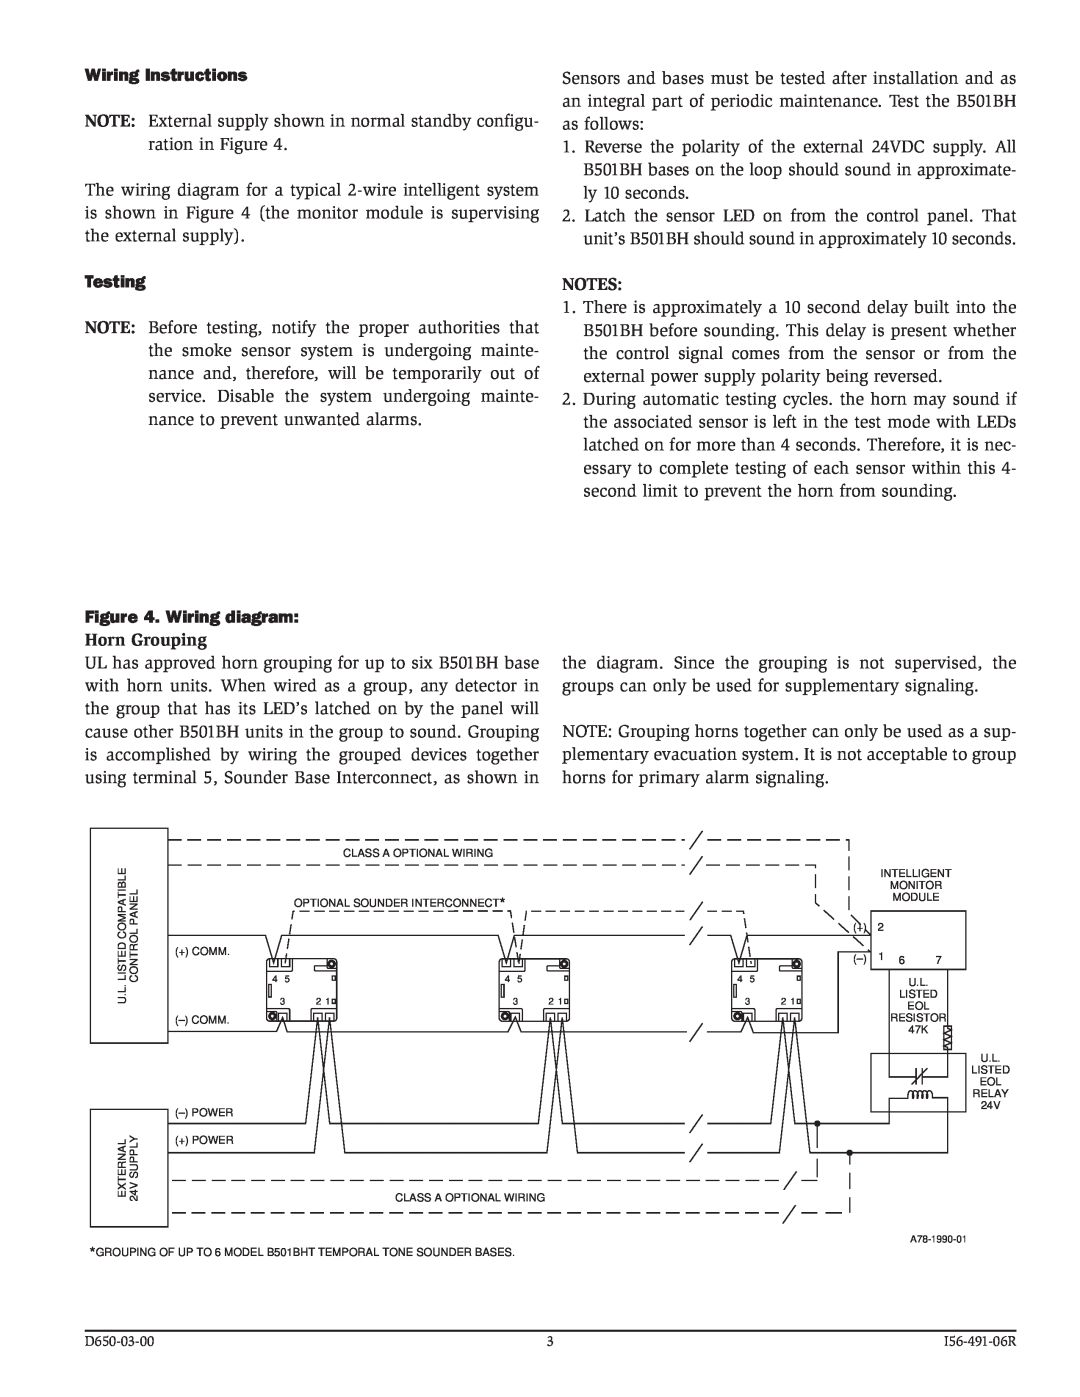 System Sensor B501BH specifications Wiring Instructions, Testing, Wiring diagram, Horn Grouping 